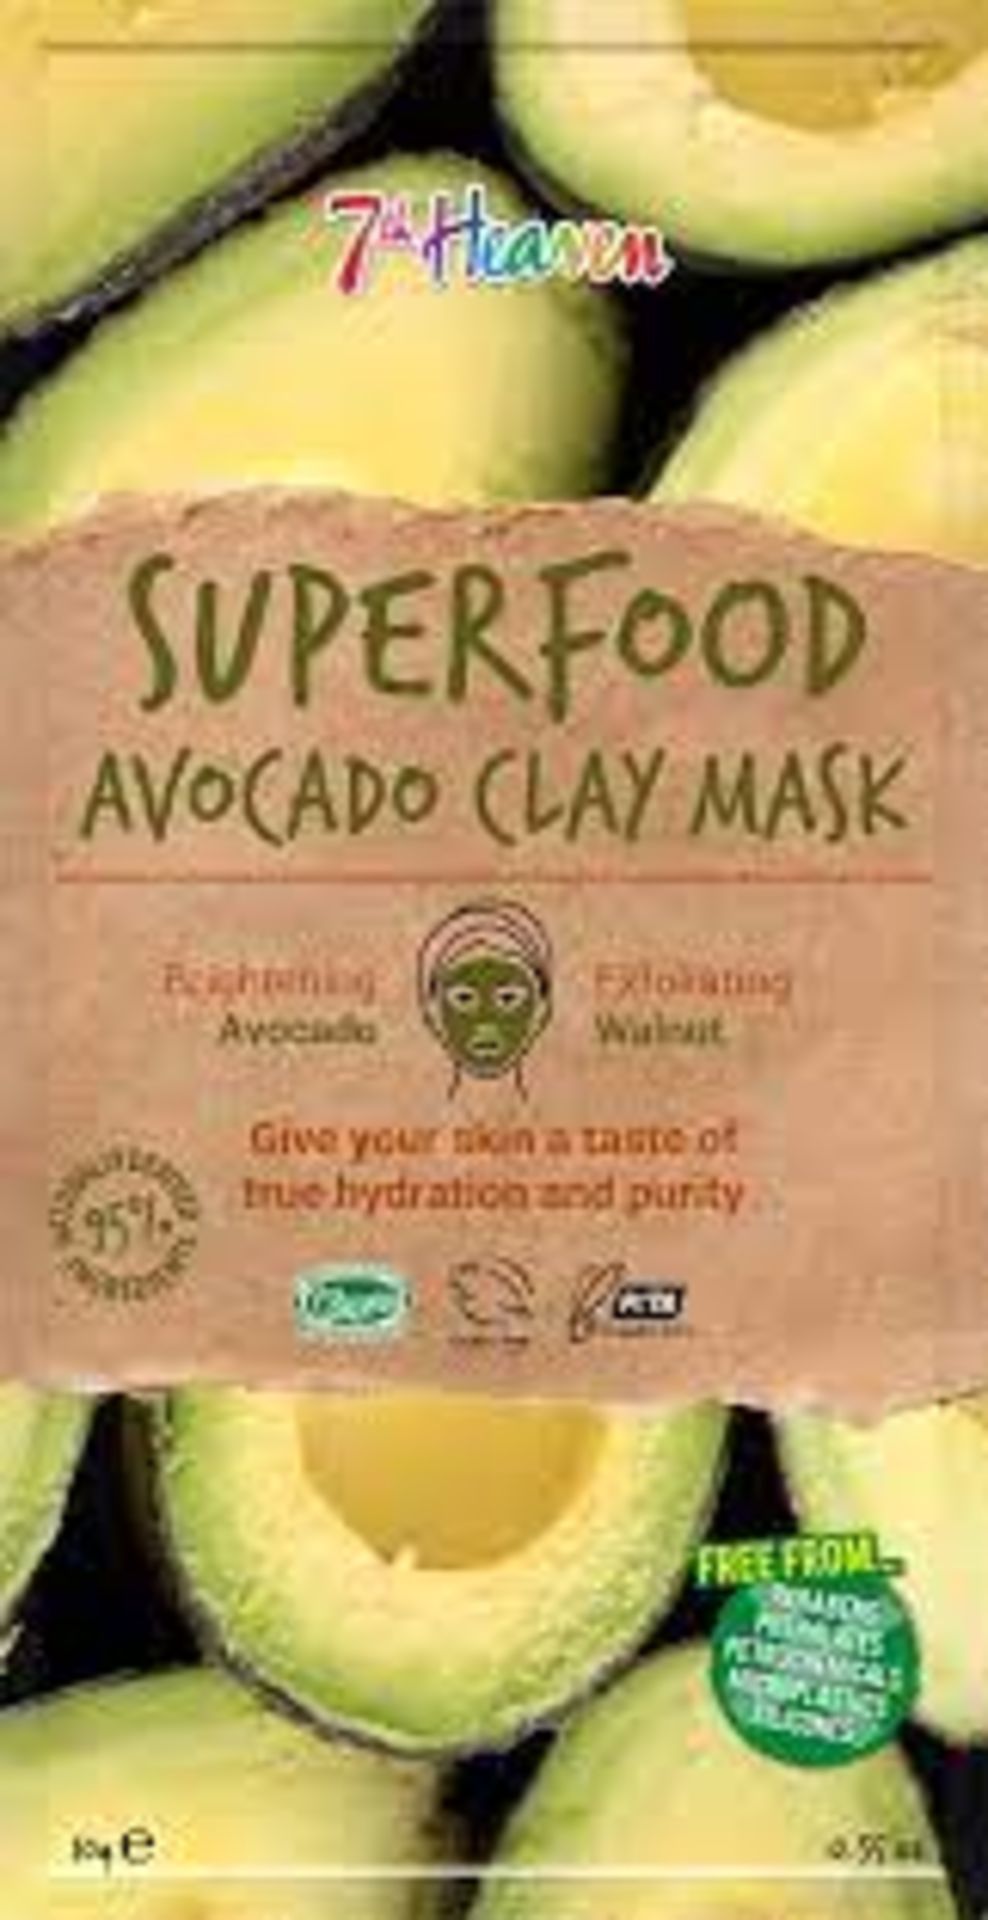 394 x BRAND NEW 7th Heaven Superfood Avocado Clay Face Mask - PW